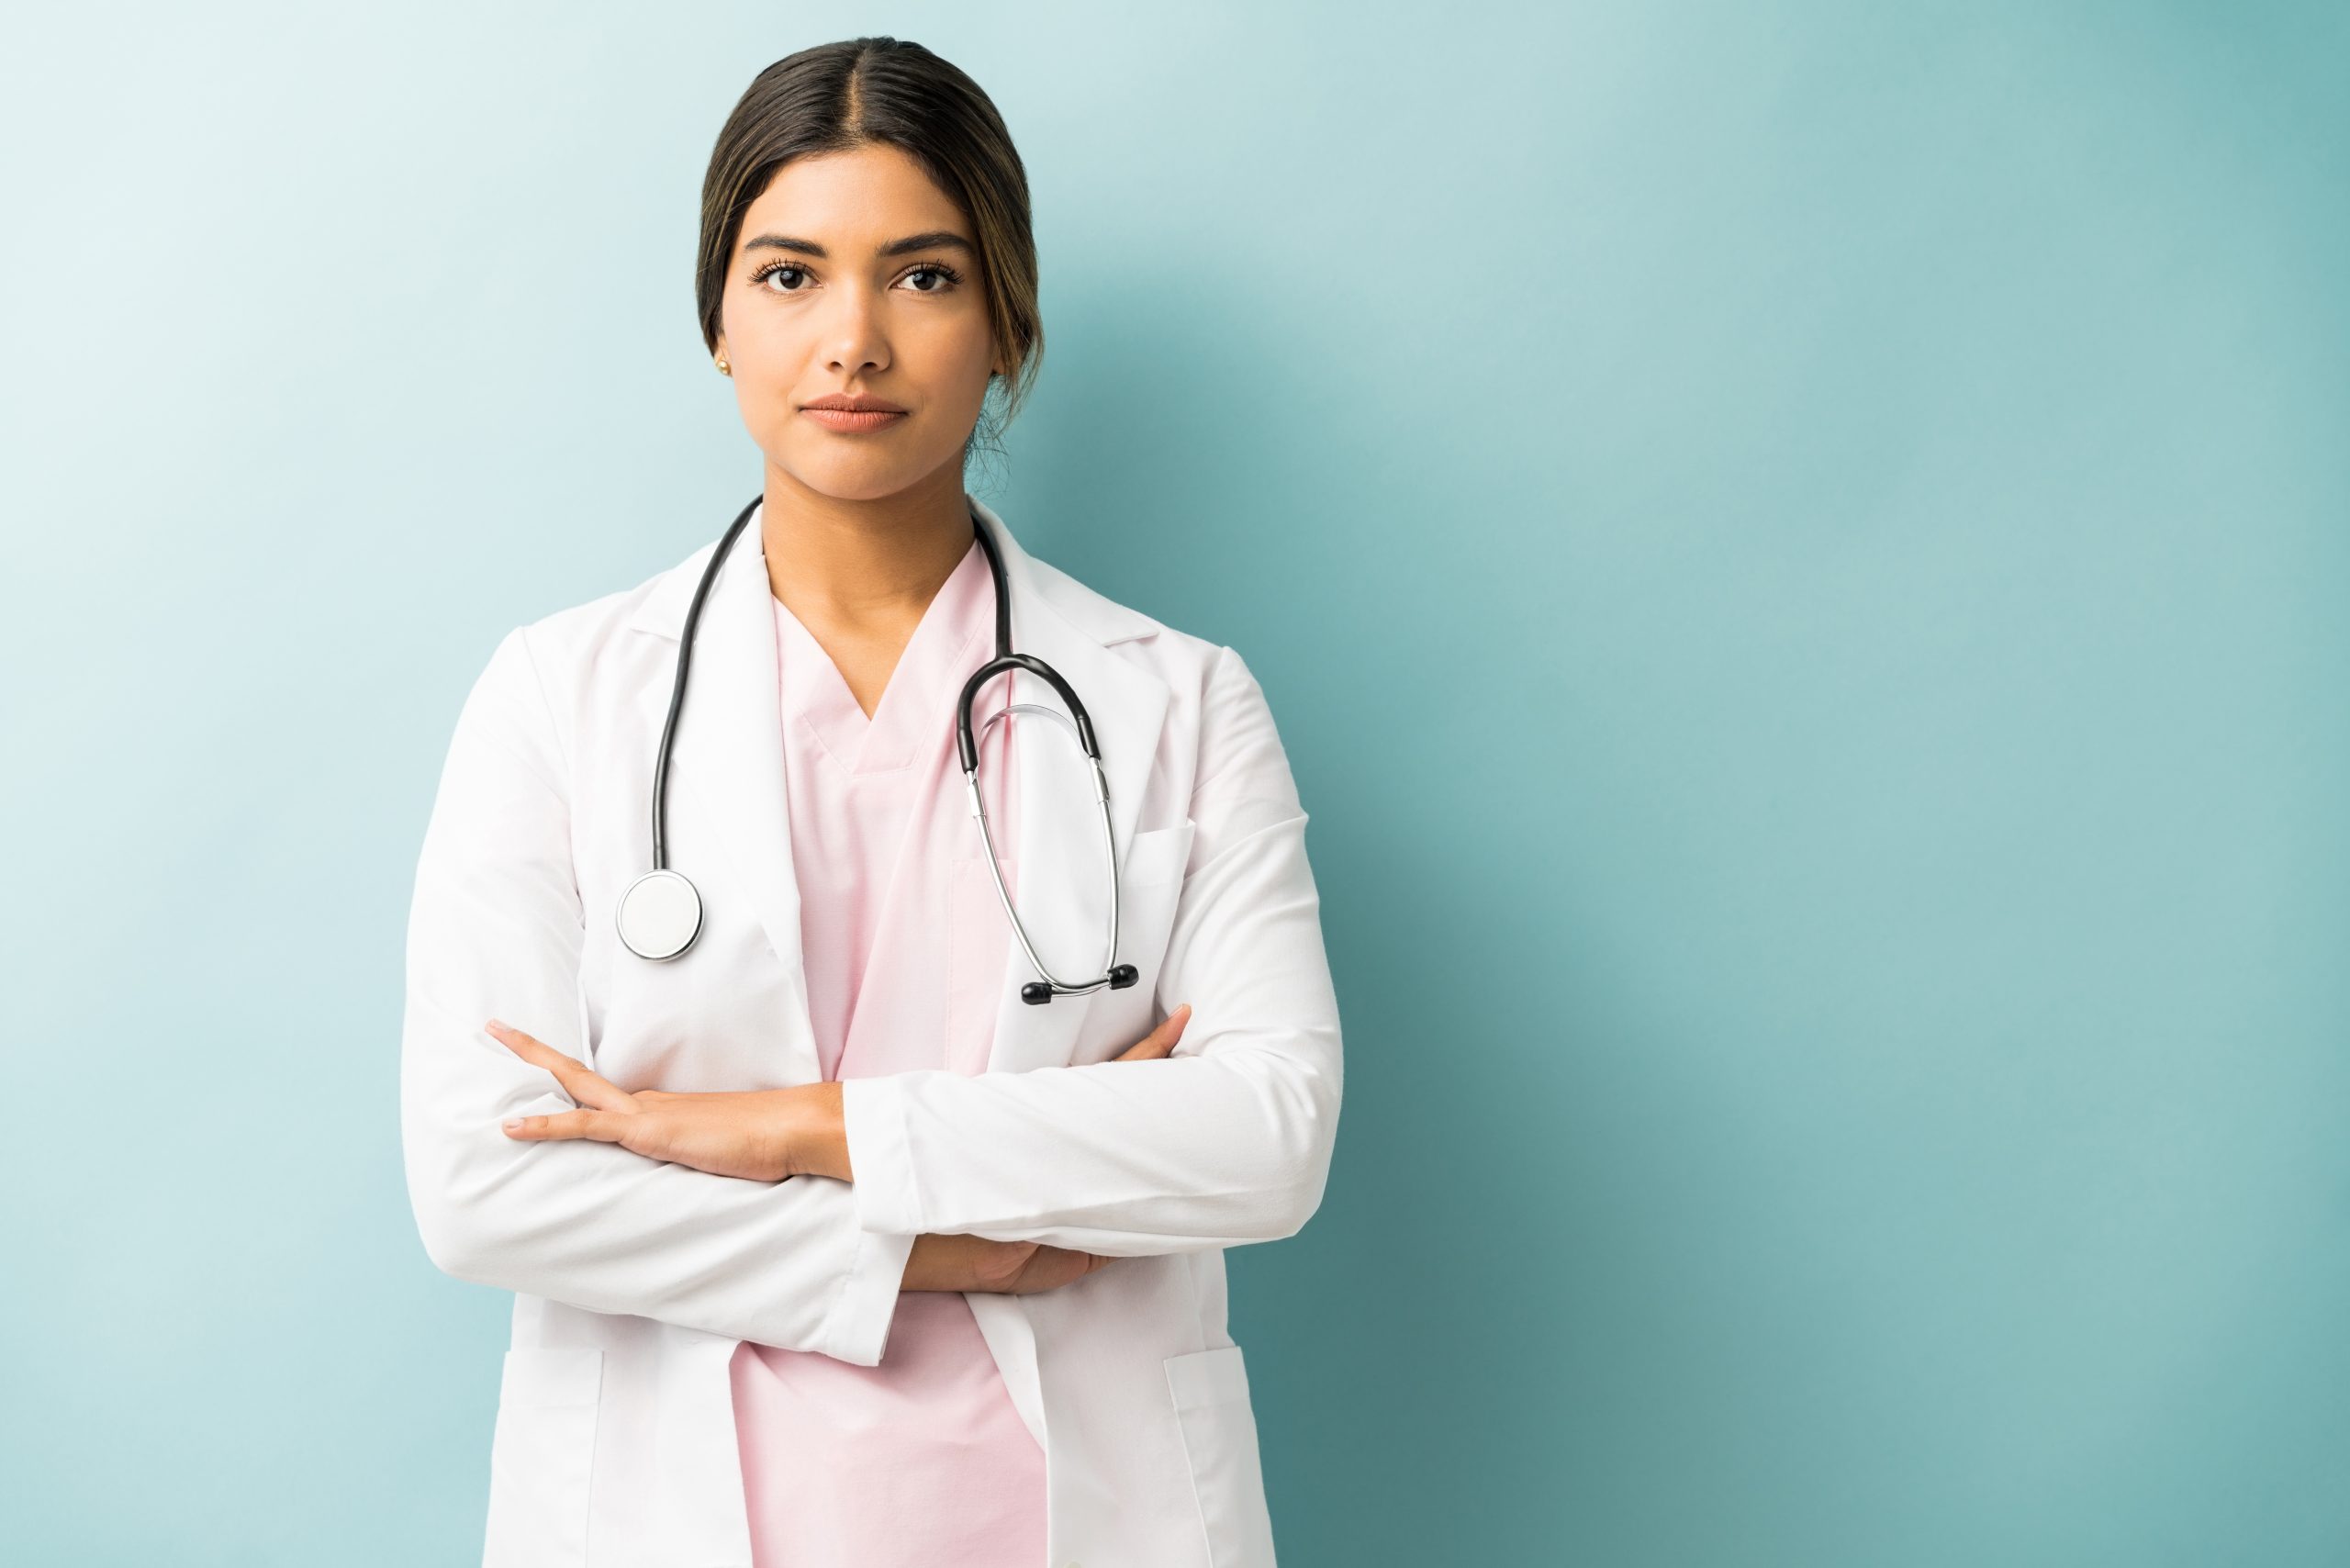 attractive medical professional uniform standing with arms crossed against isolated background scaled